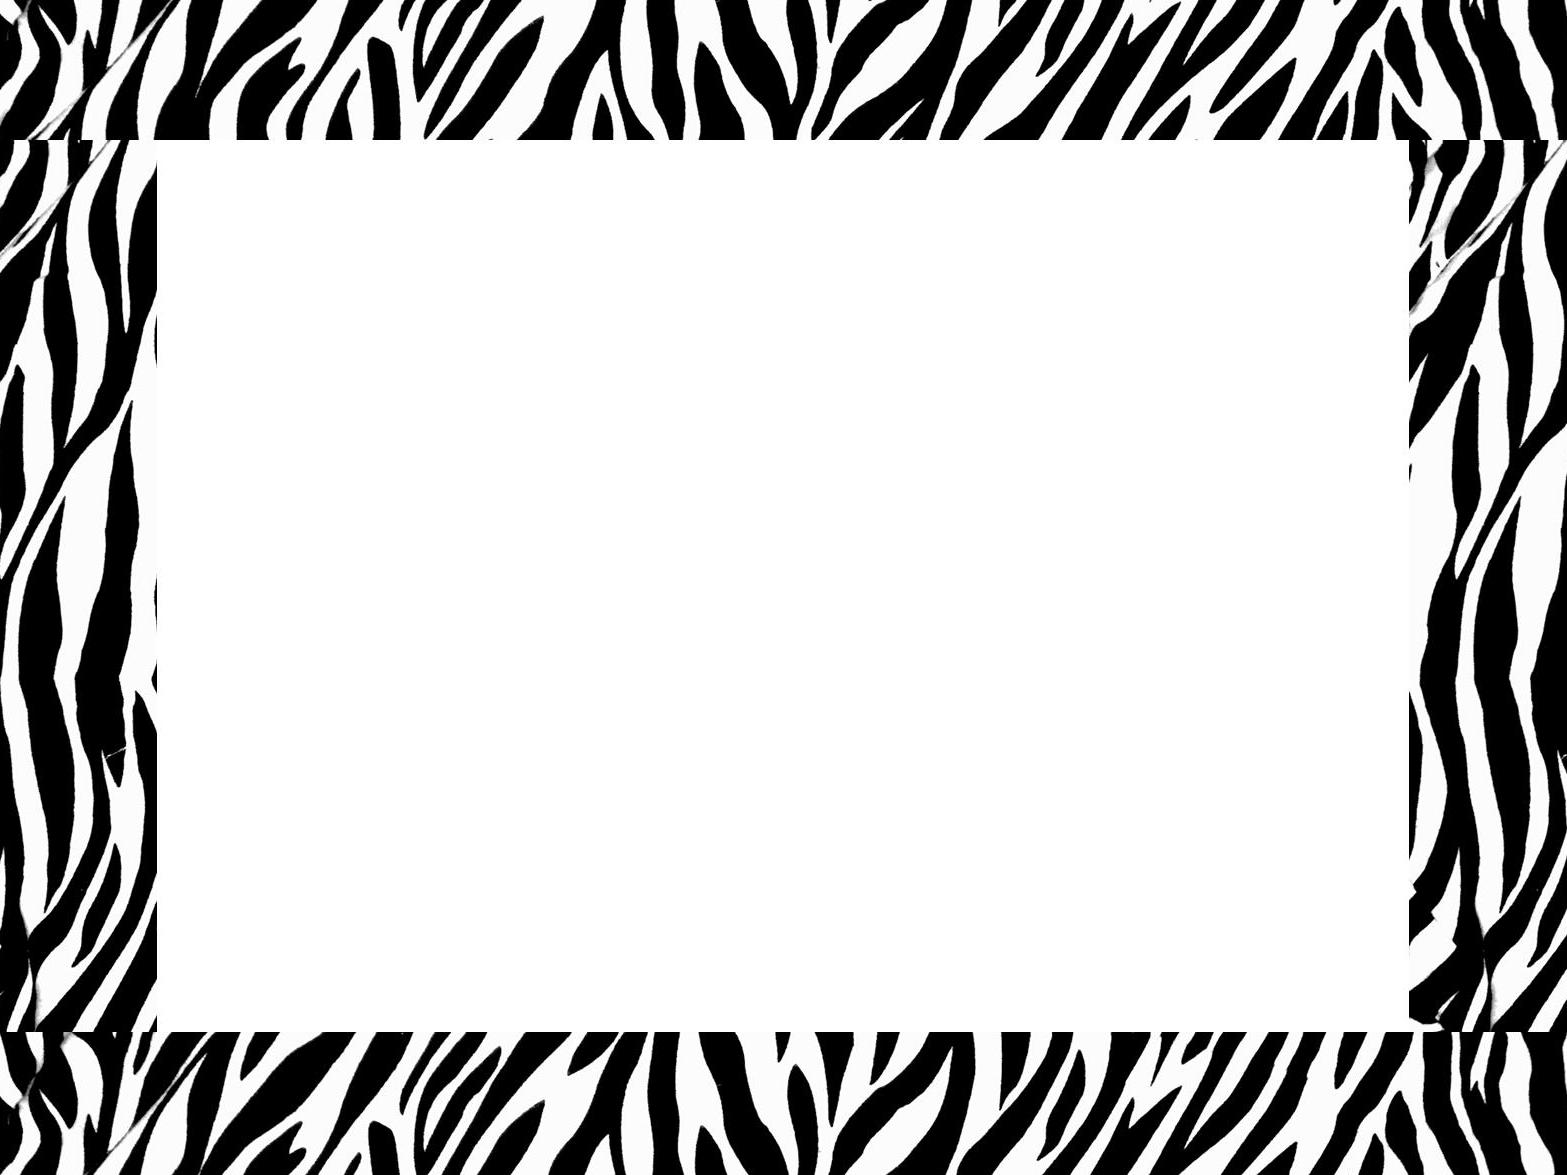 Free Zebra Print Border Template Download Free Zebra Print Border Template Png Images Free Cliparts On Clipart Library